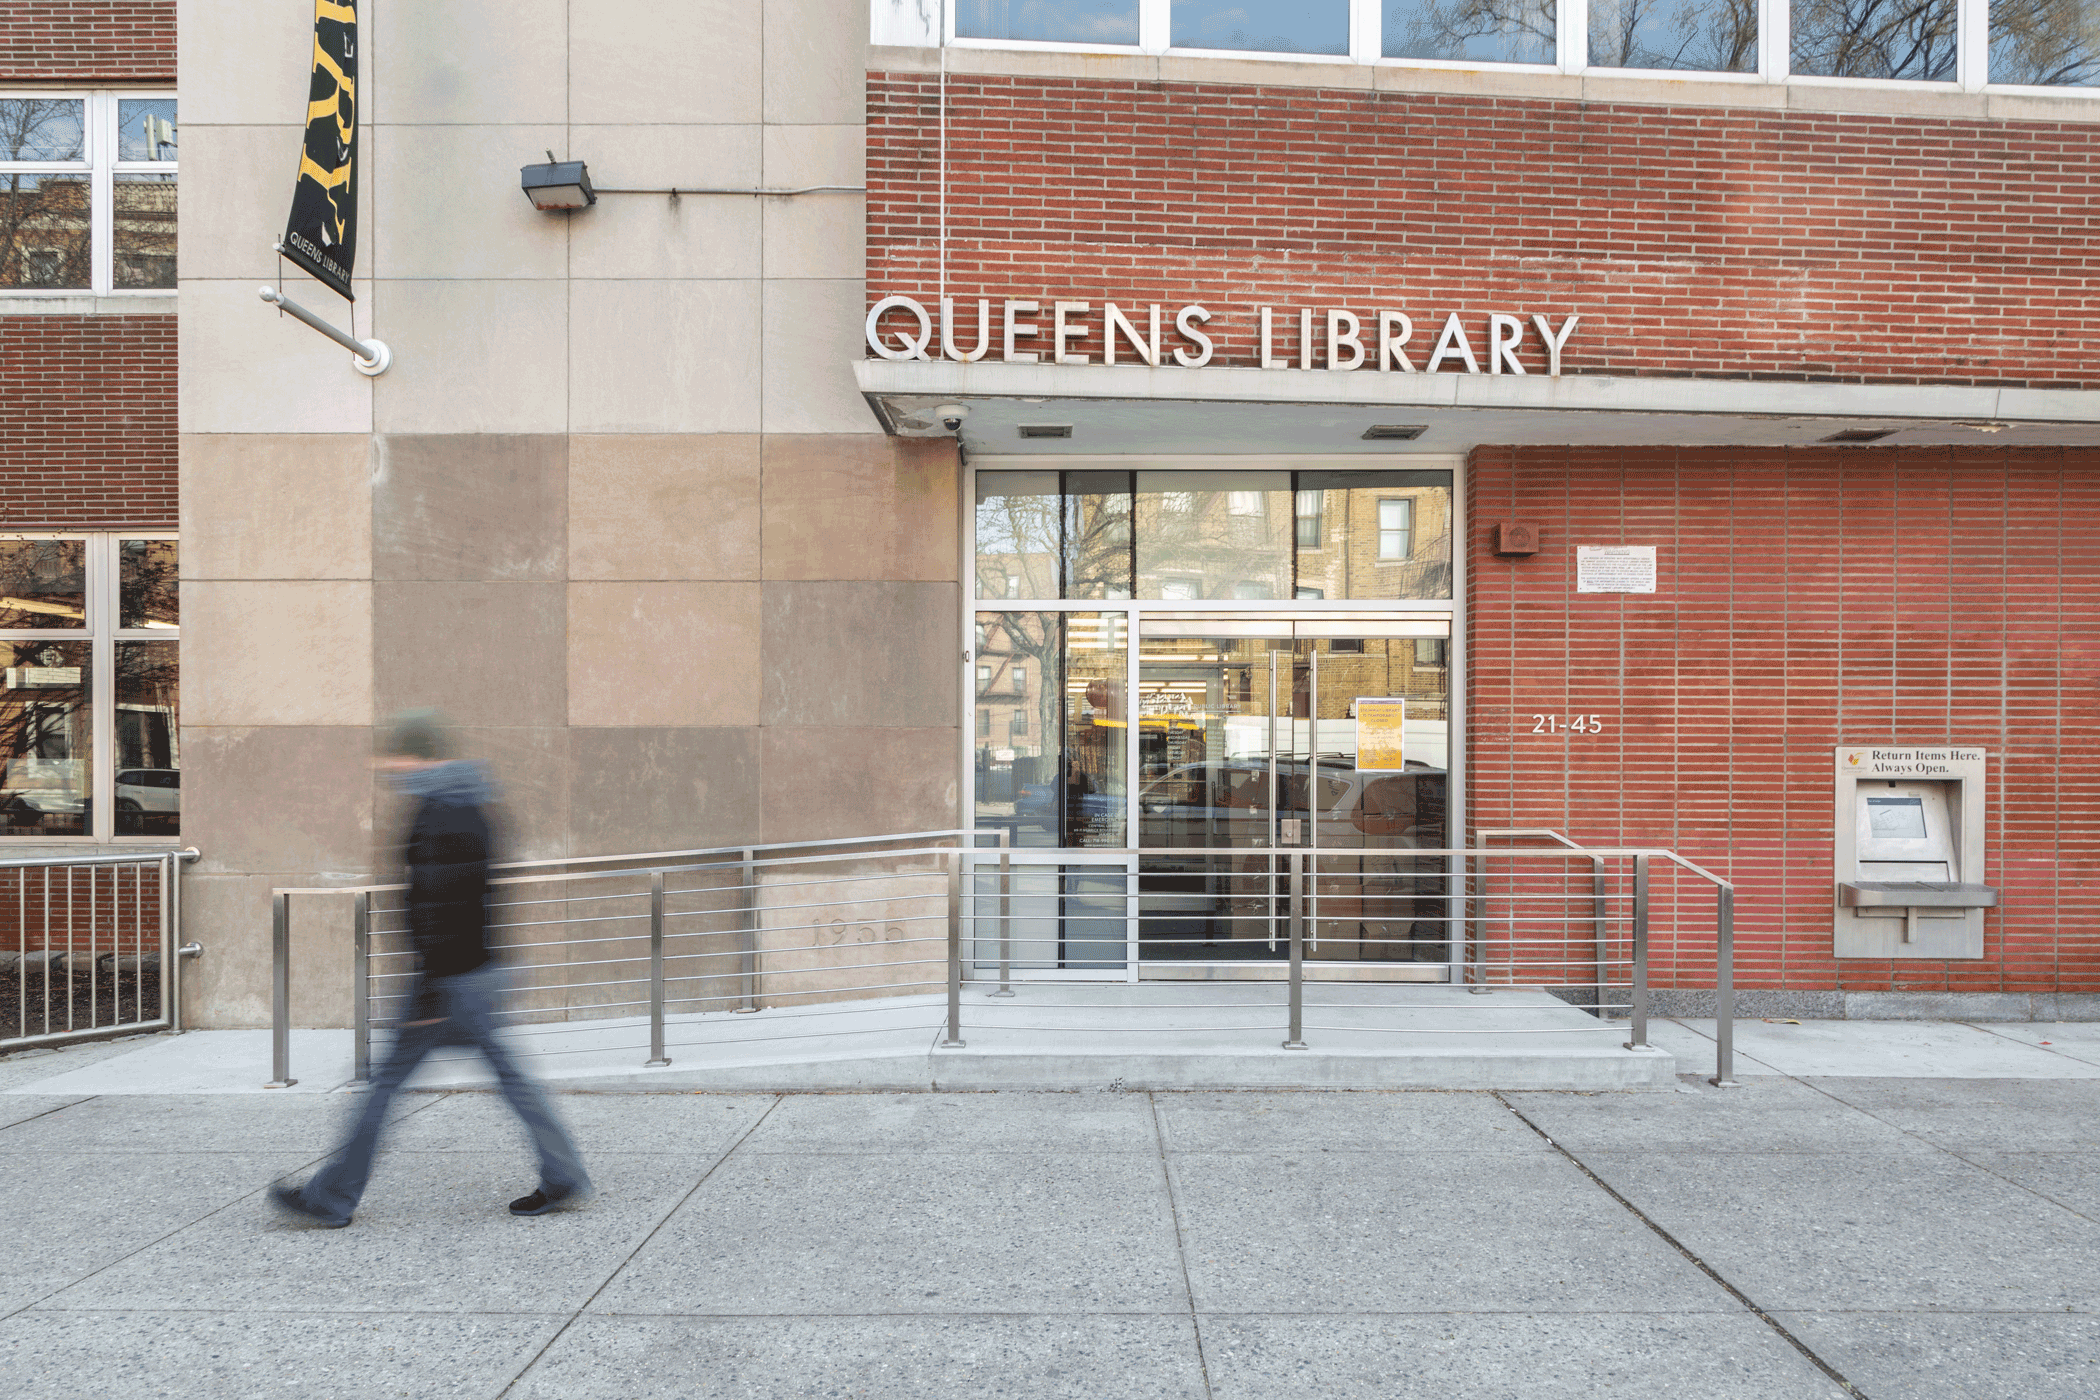 Steinway Library’s main entrance on 31st Street features a new ADA accessible ramped entrance and a 24/7 exterior book returns machine.